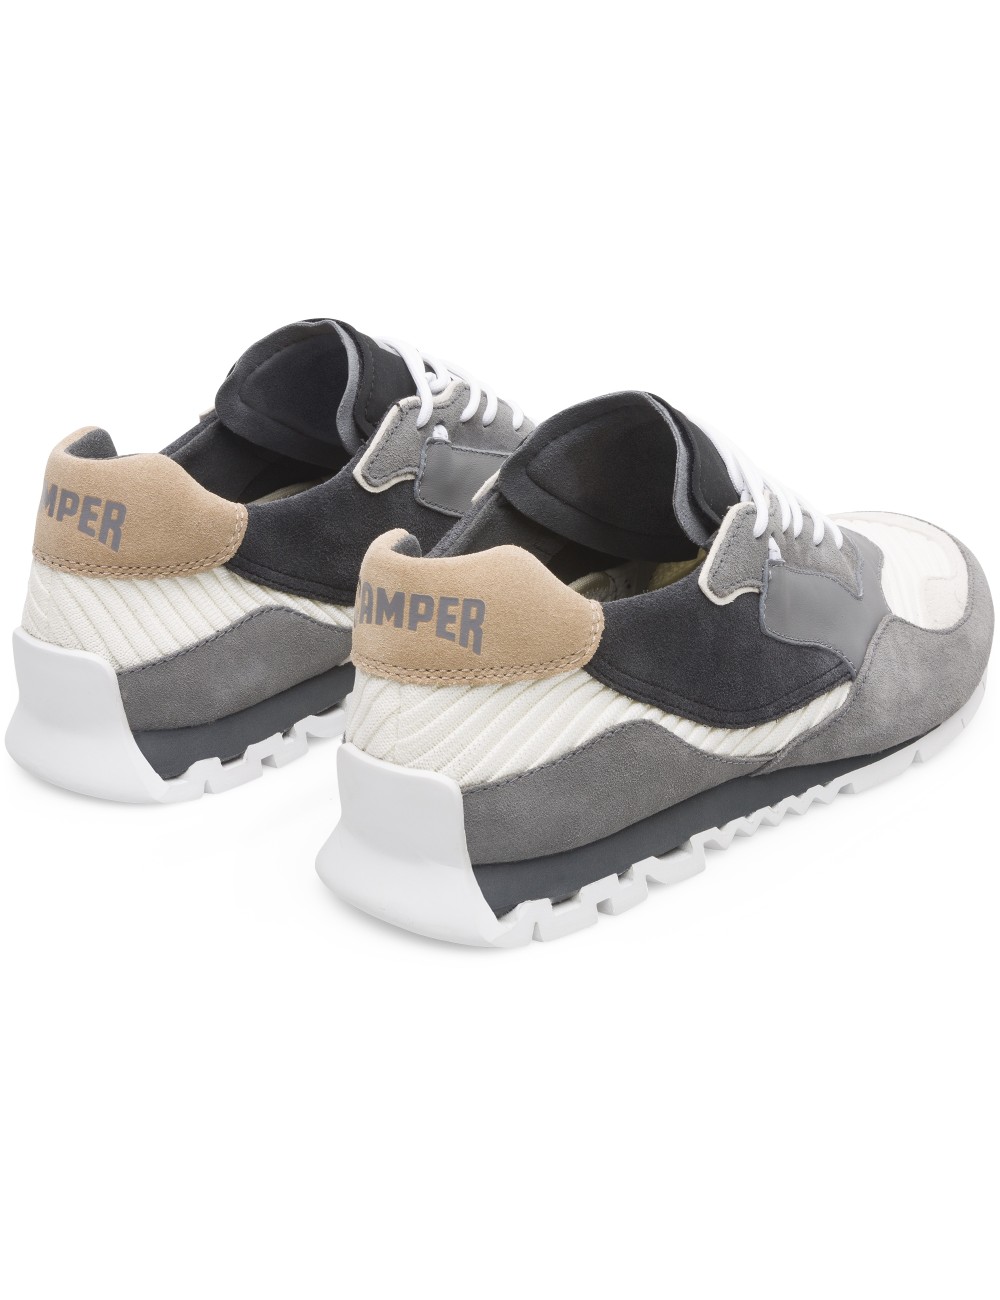 SNEAKERS HOMBRE CAMPER NOTHING MULTI